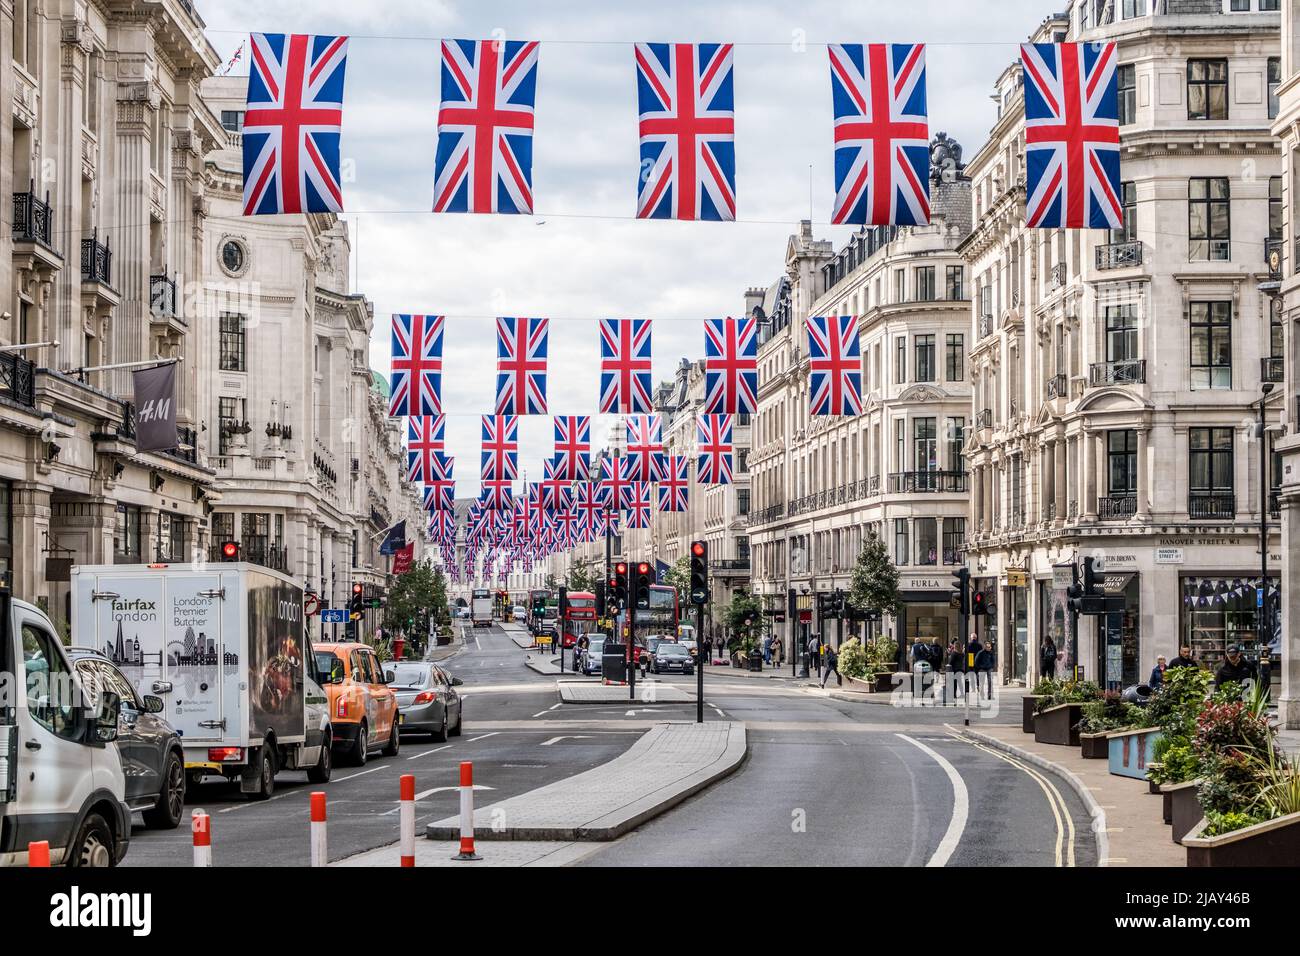 Union Jack flags hang in Regent street, London for the Queen's Platinum Jubilee 2022. Stock Photo